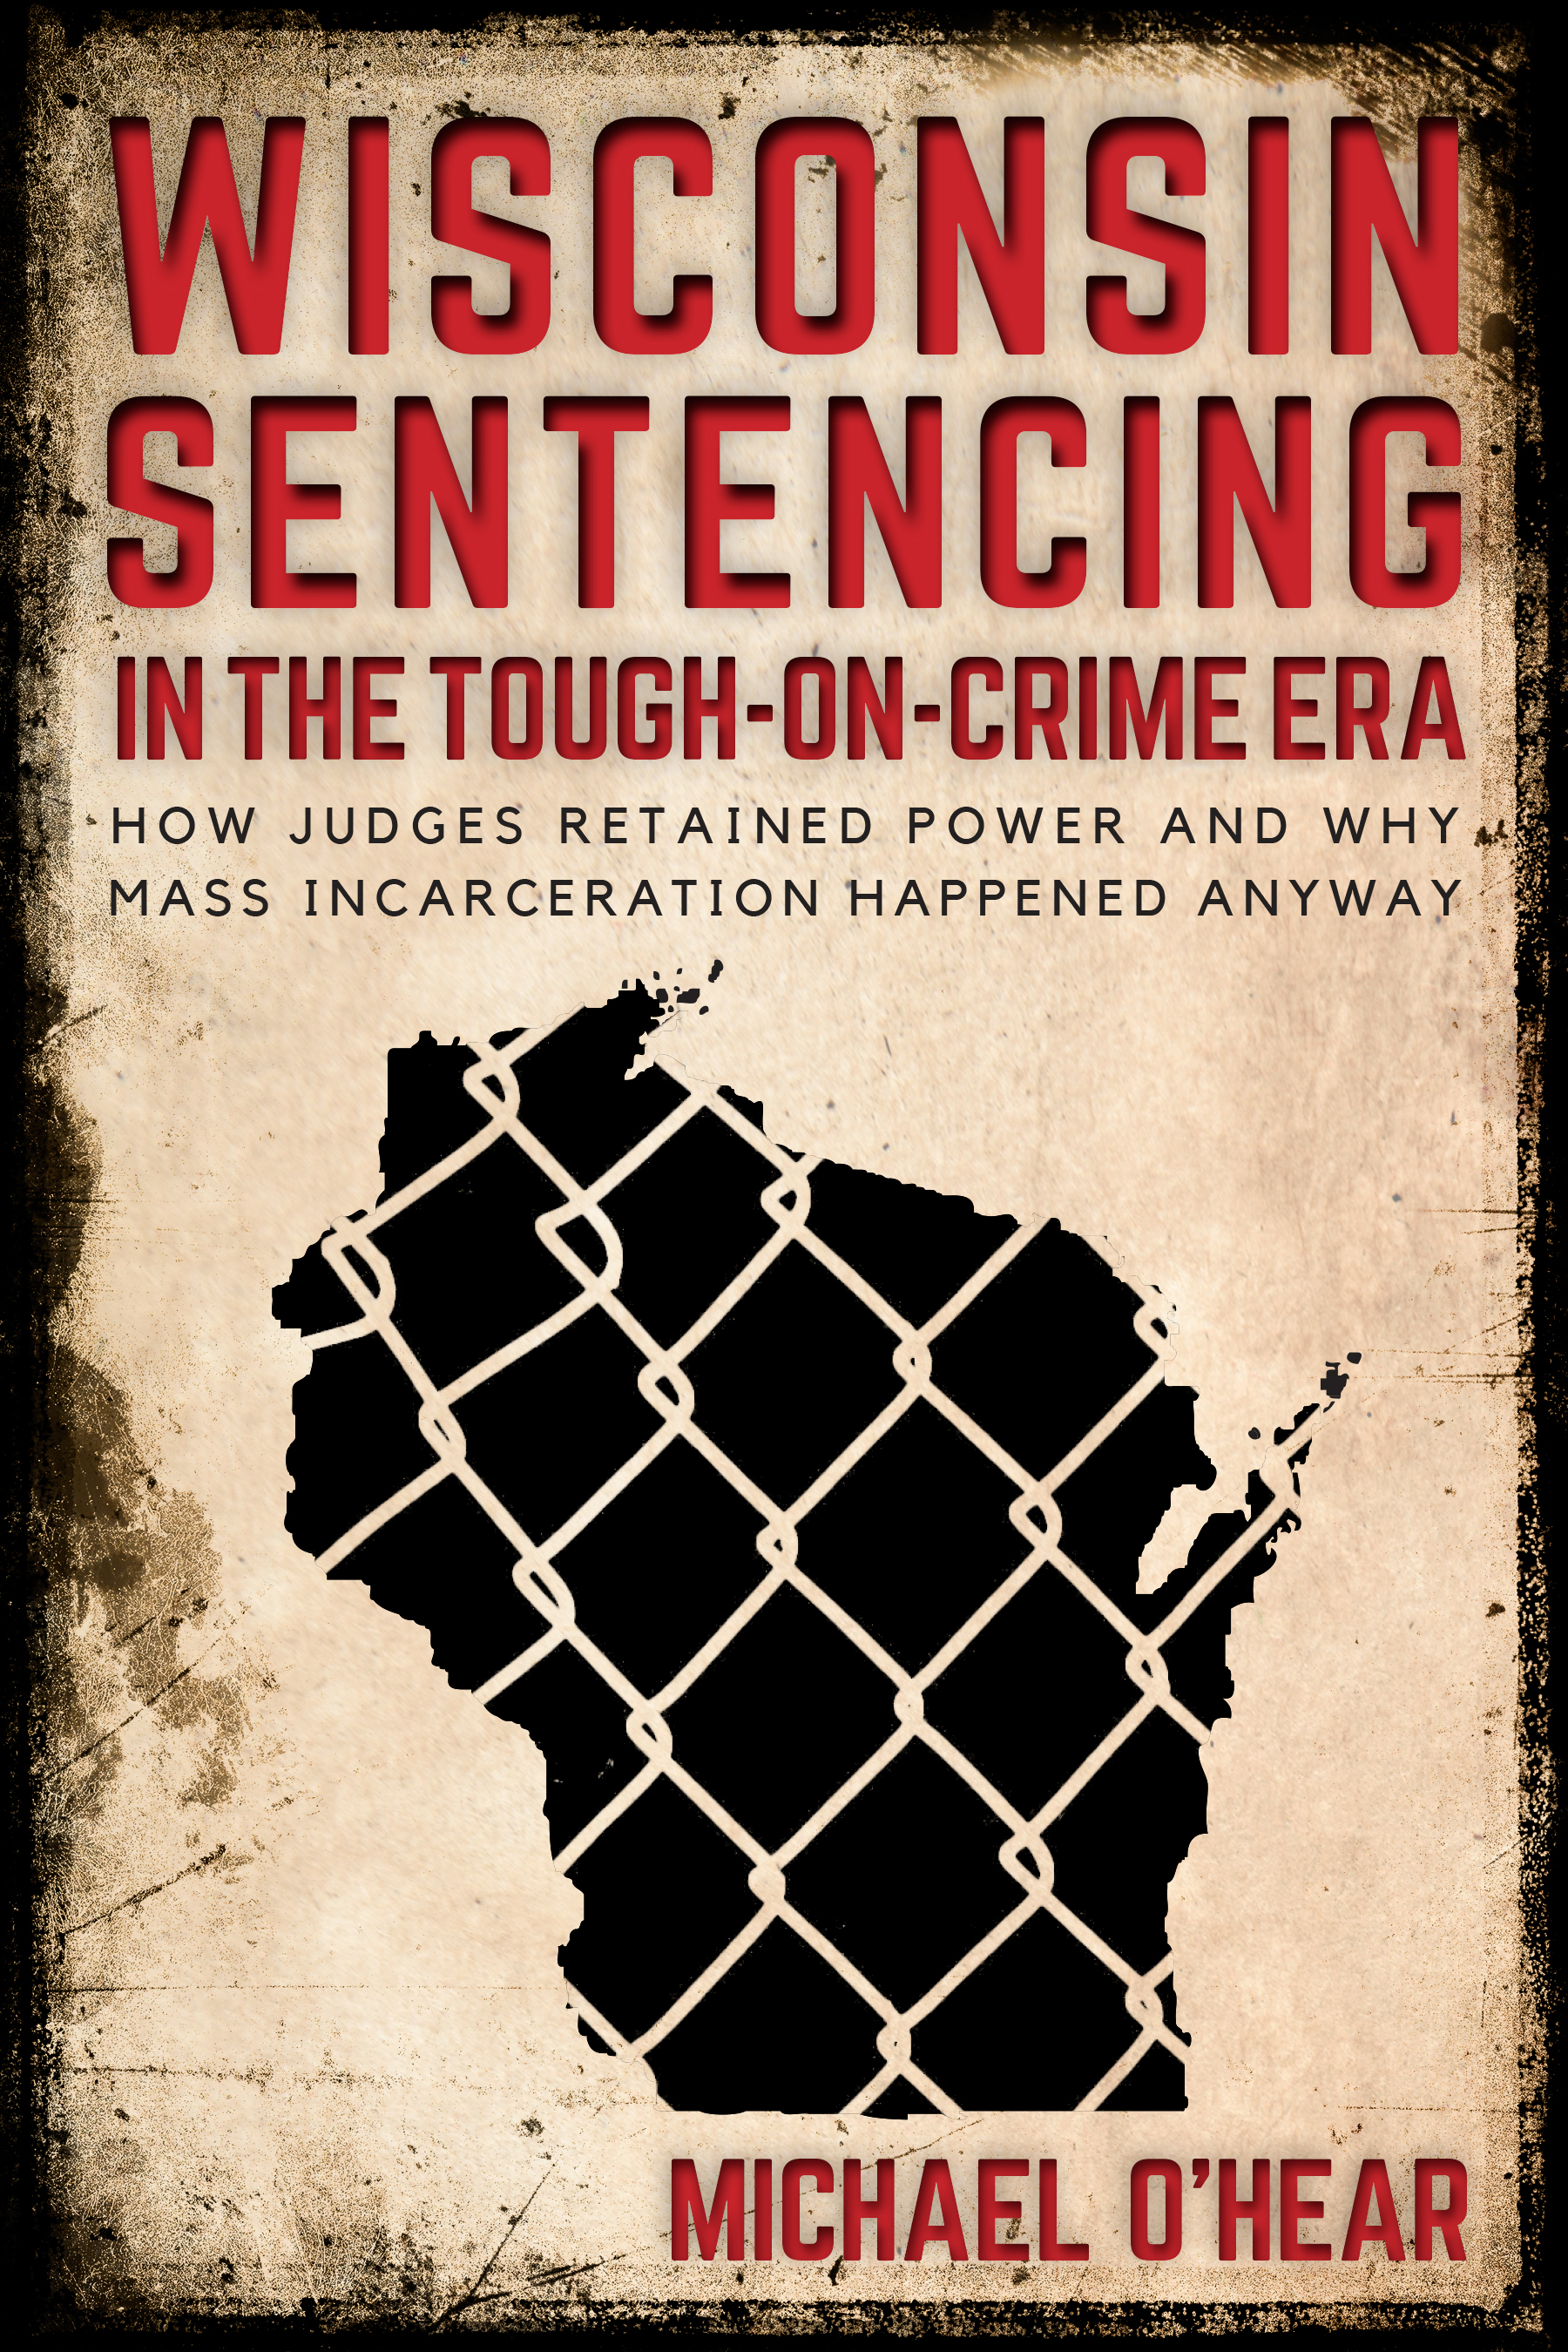 The University of Wisconsin Press is proud to announce the publication of Wisconsin Sentencing in the Tough-on-Crime Era